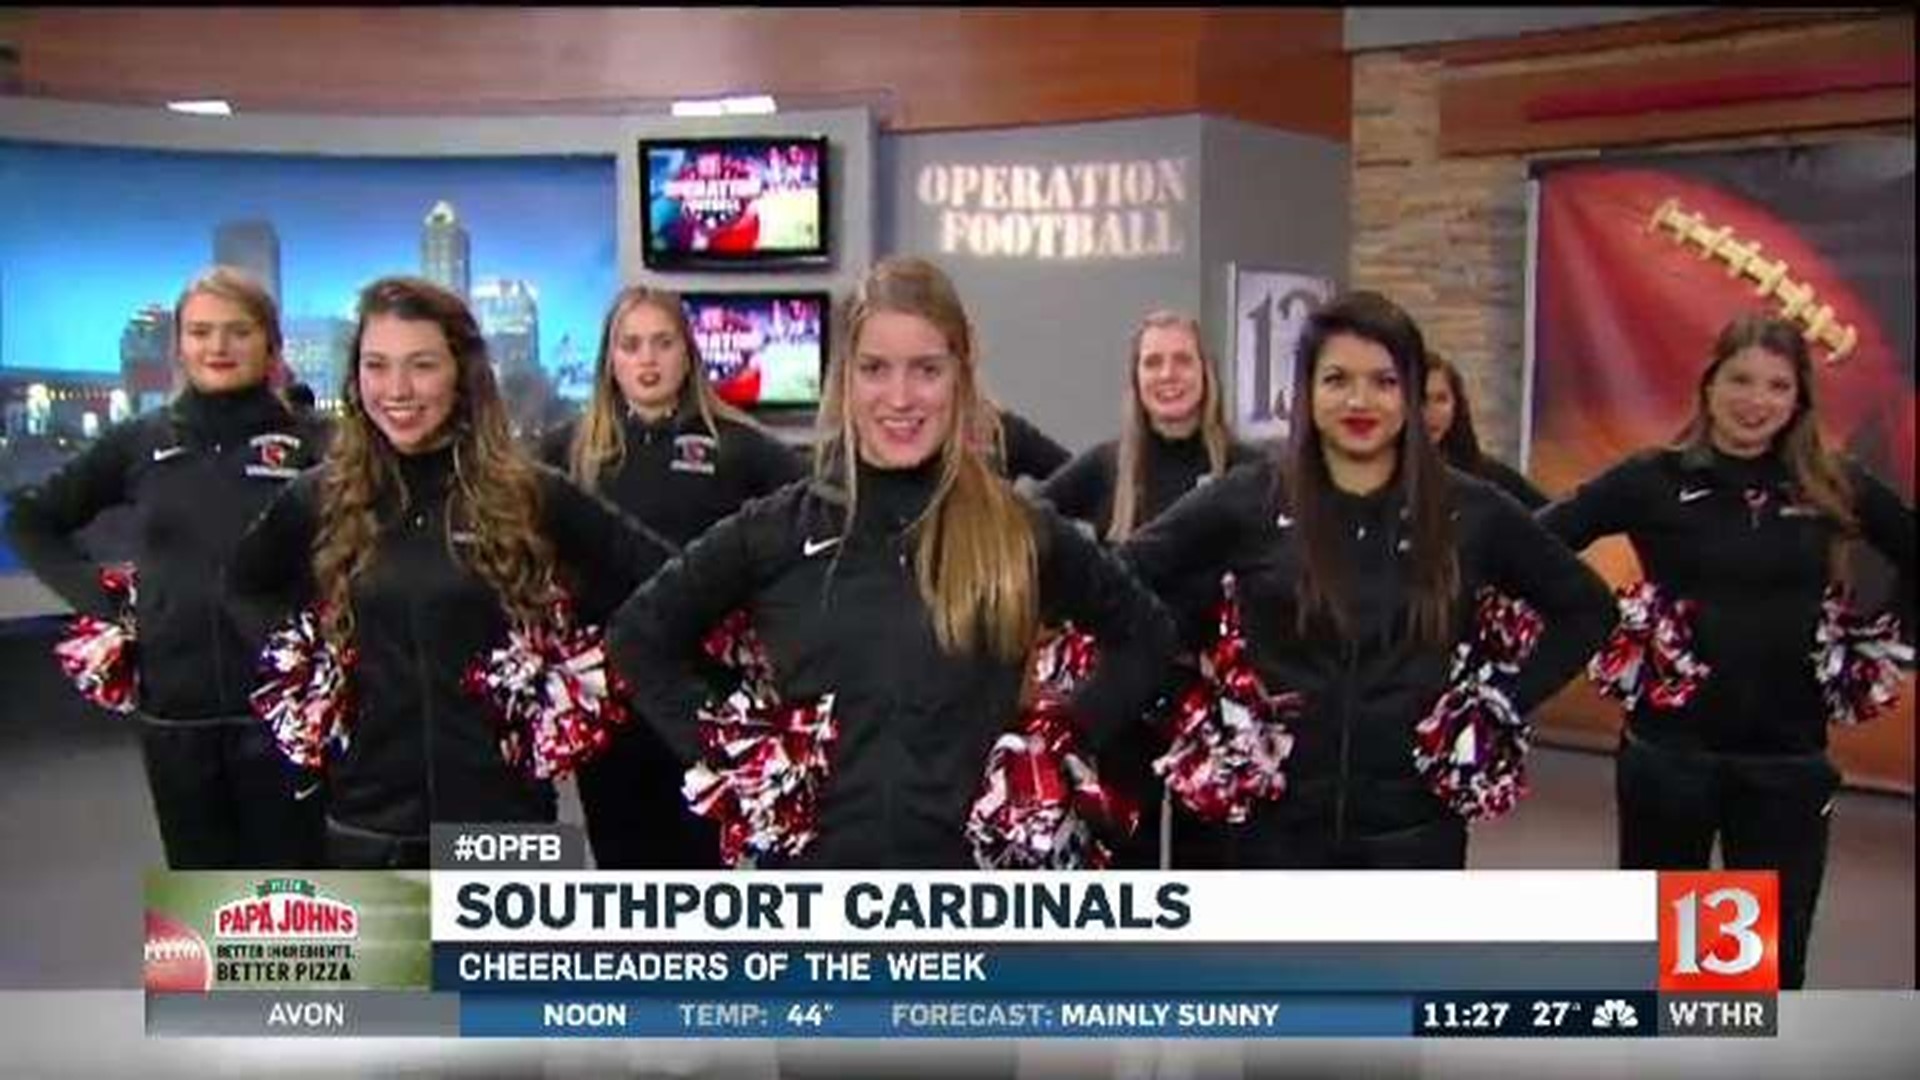 Operation Football Cheerleaders of the Week: Southport